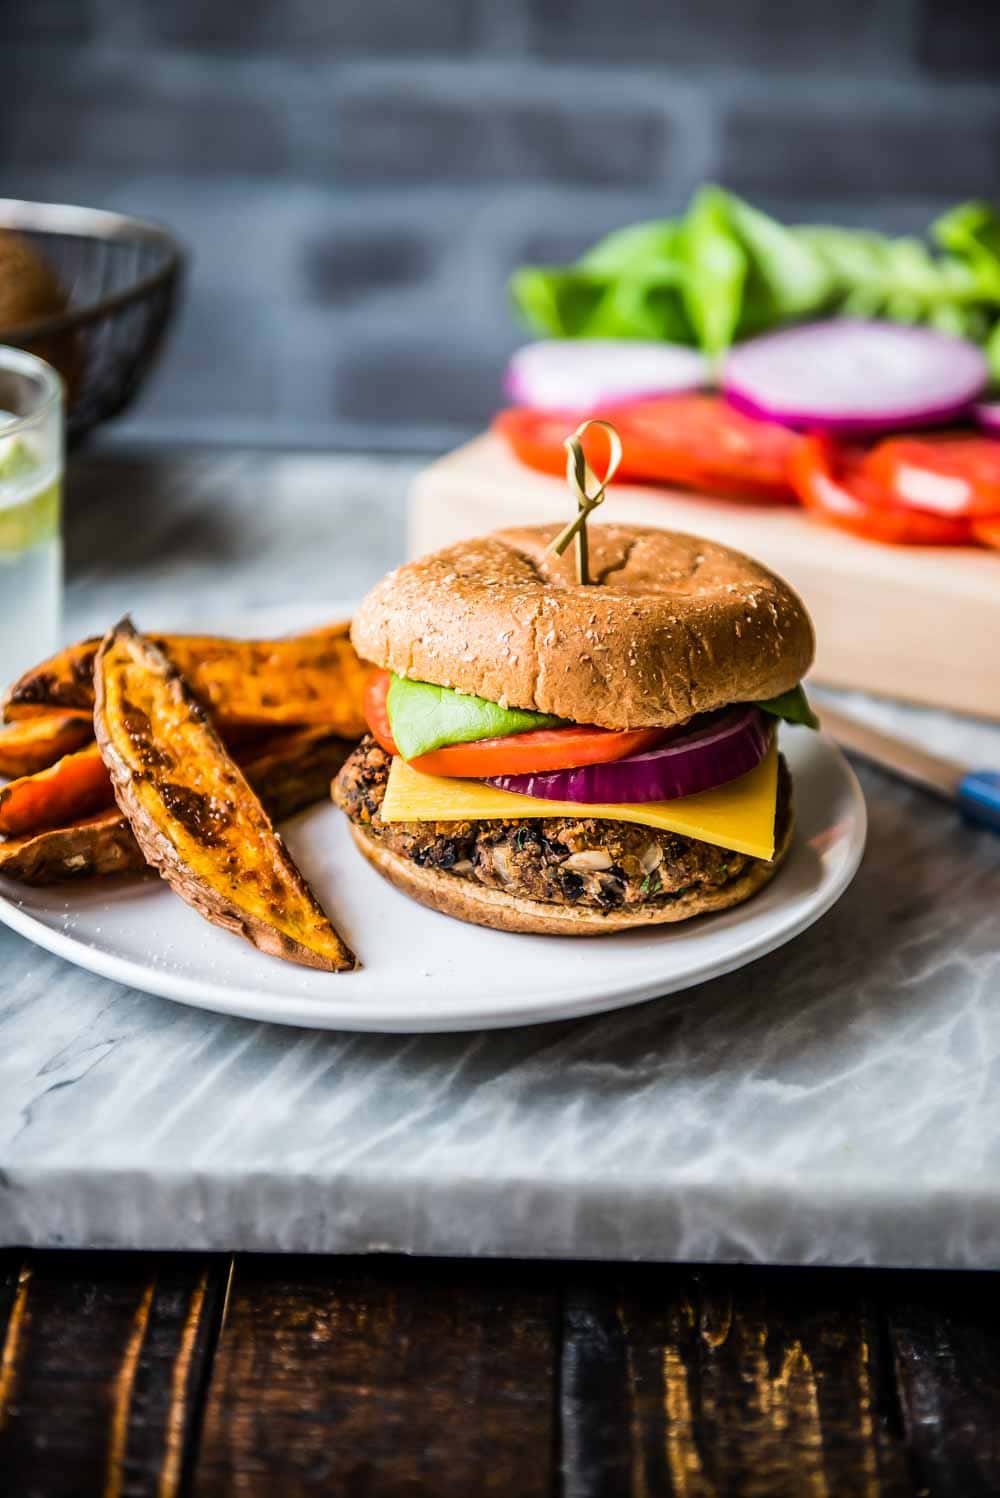 simply plated black bean burger with sweet potato wedge fries.